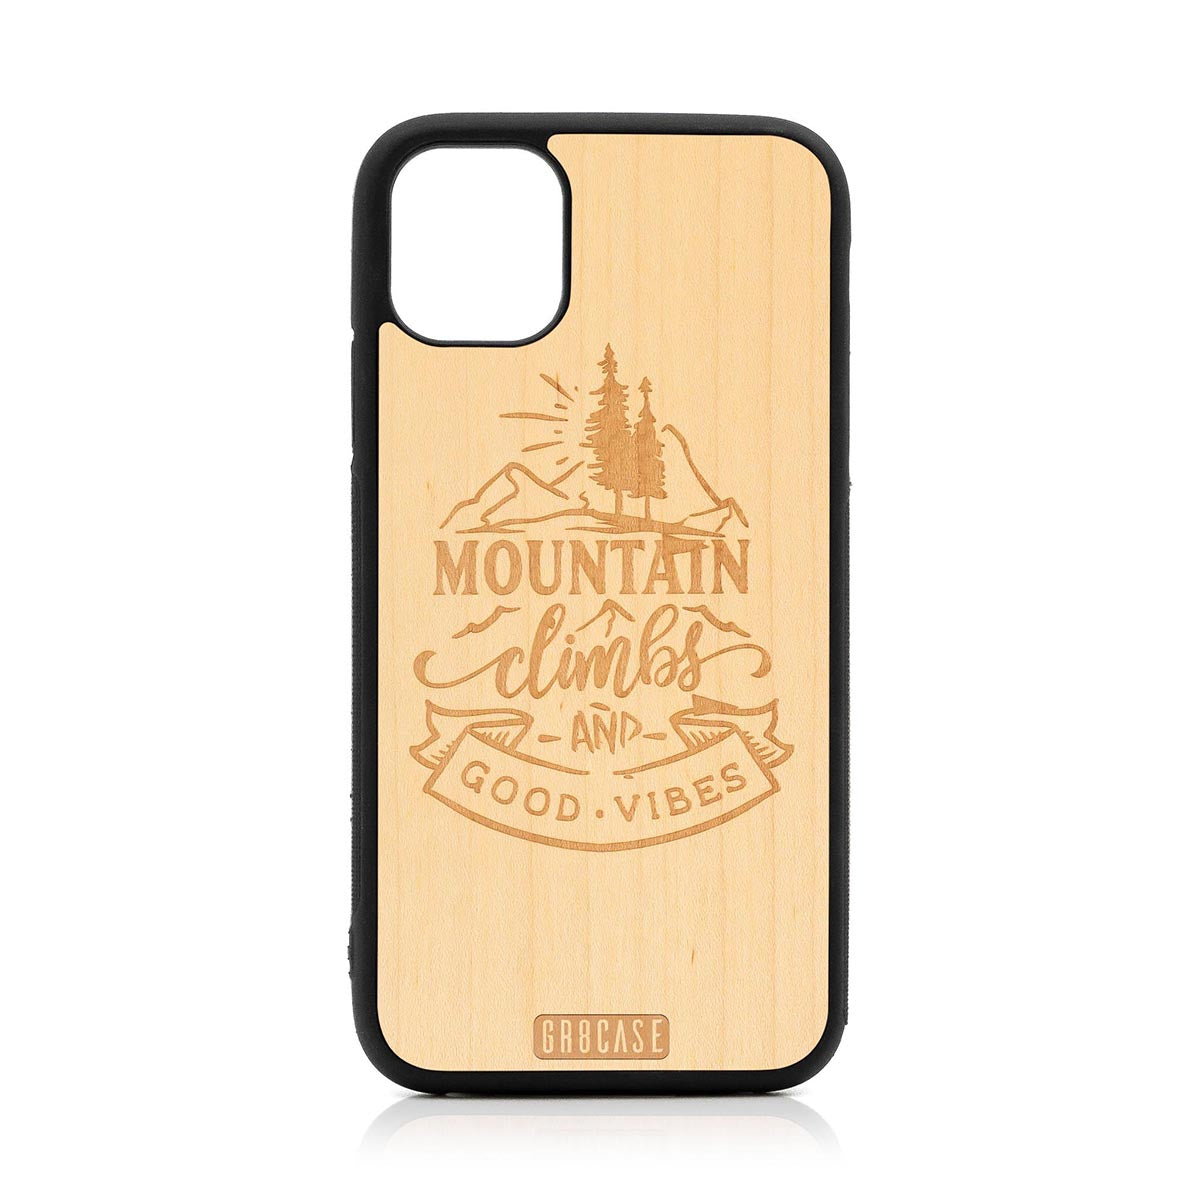 Mountain Climbs And Good Vibes Design Wood Case For iPhone 11 by GR8CASE